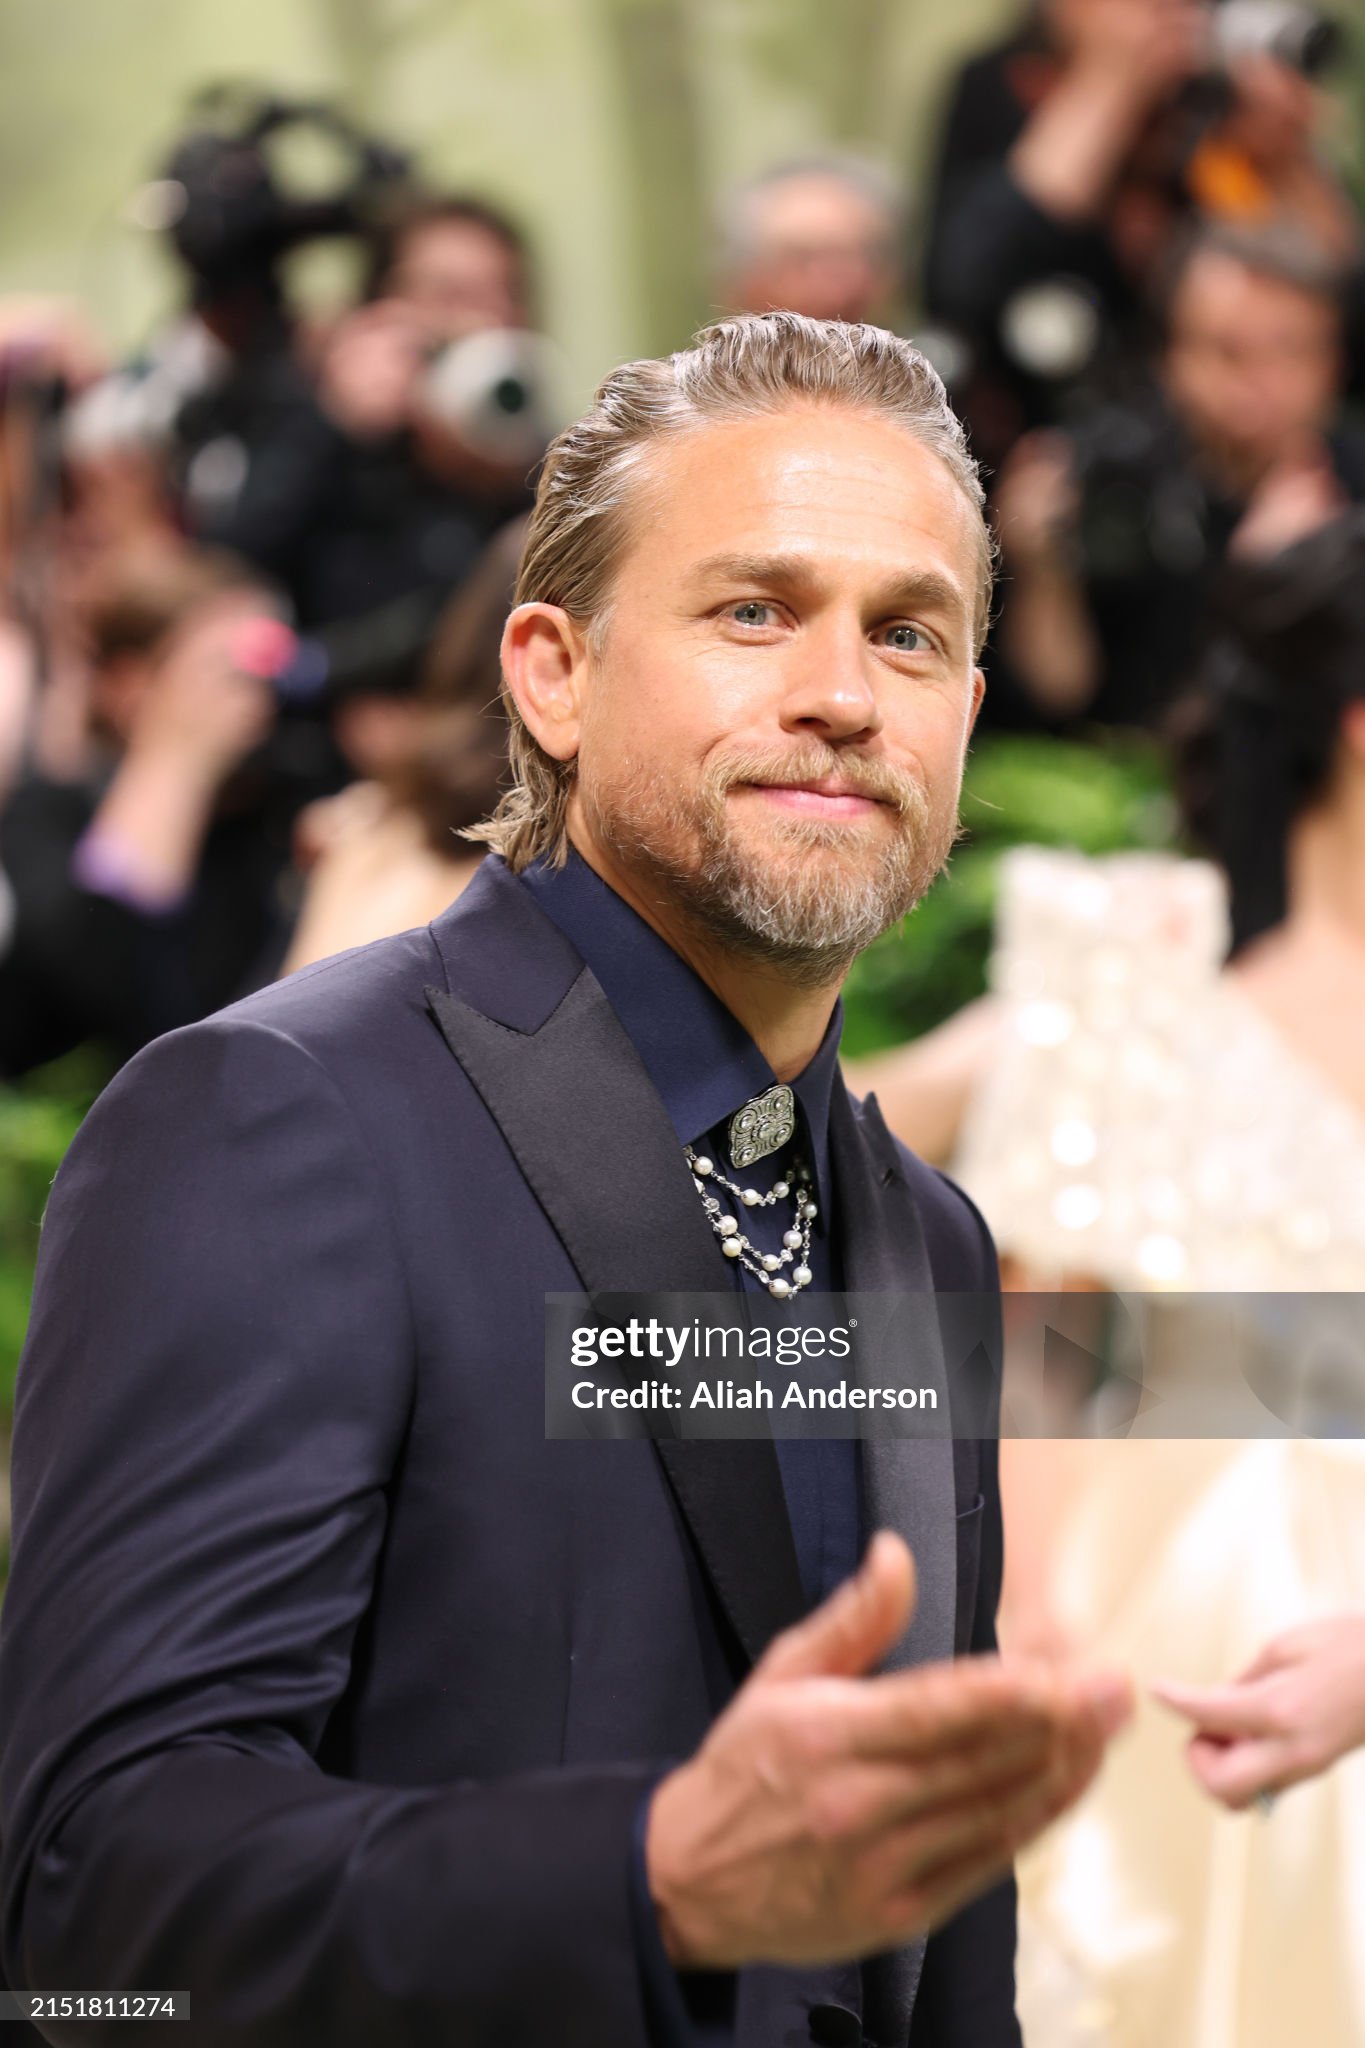 gettyimages-2151811274-2048x2048.jpg